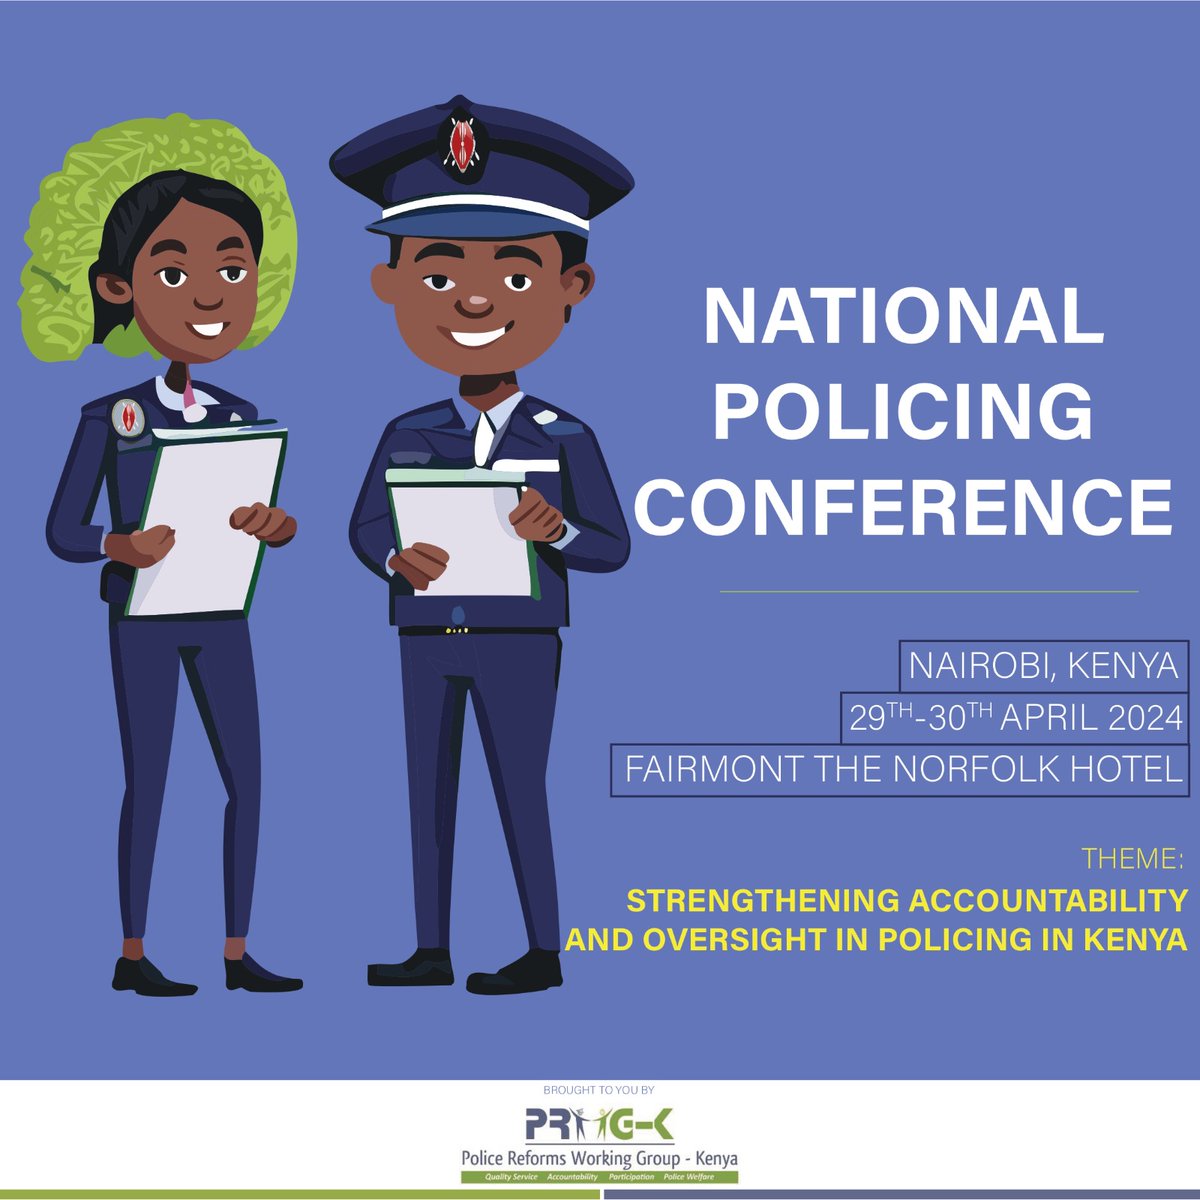 There's a need for accountability in the police force while undertaking their duties. #NationalPolicingConference24 aims to discuss strengthening accountability and oversight in policing in Kenya. #ReformingPolicing #UtumishiKwaMwananchi